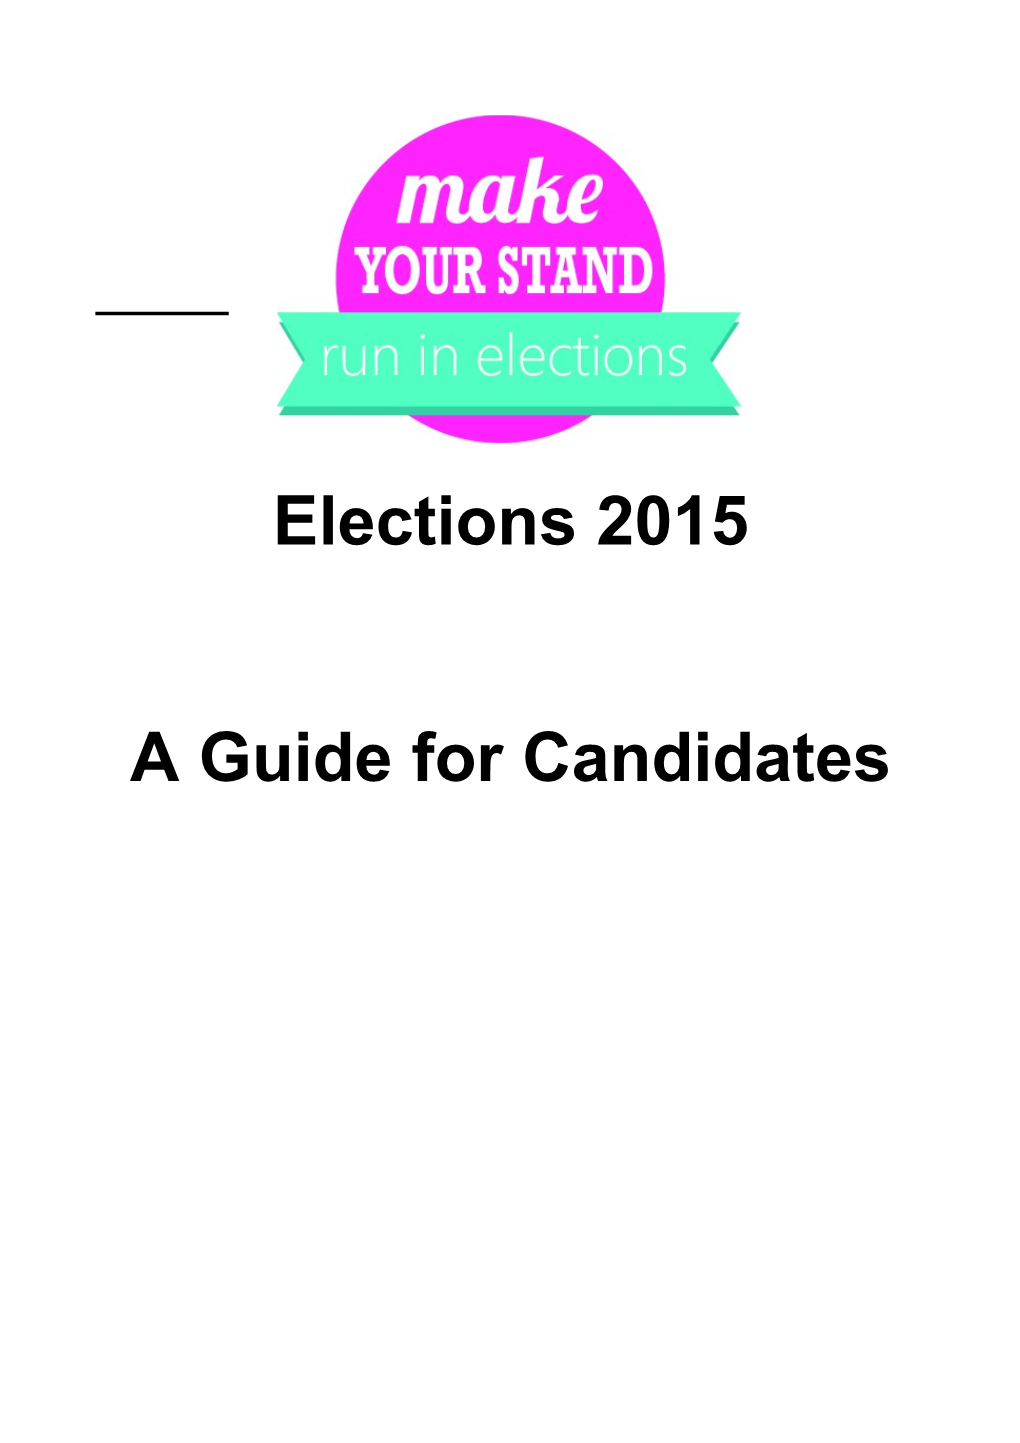 A Guide for Candidates